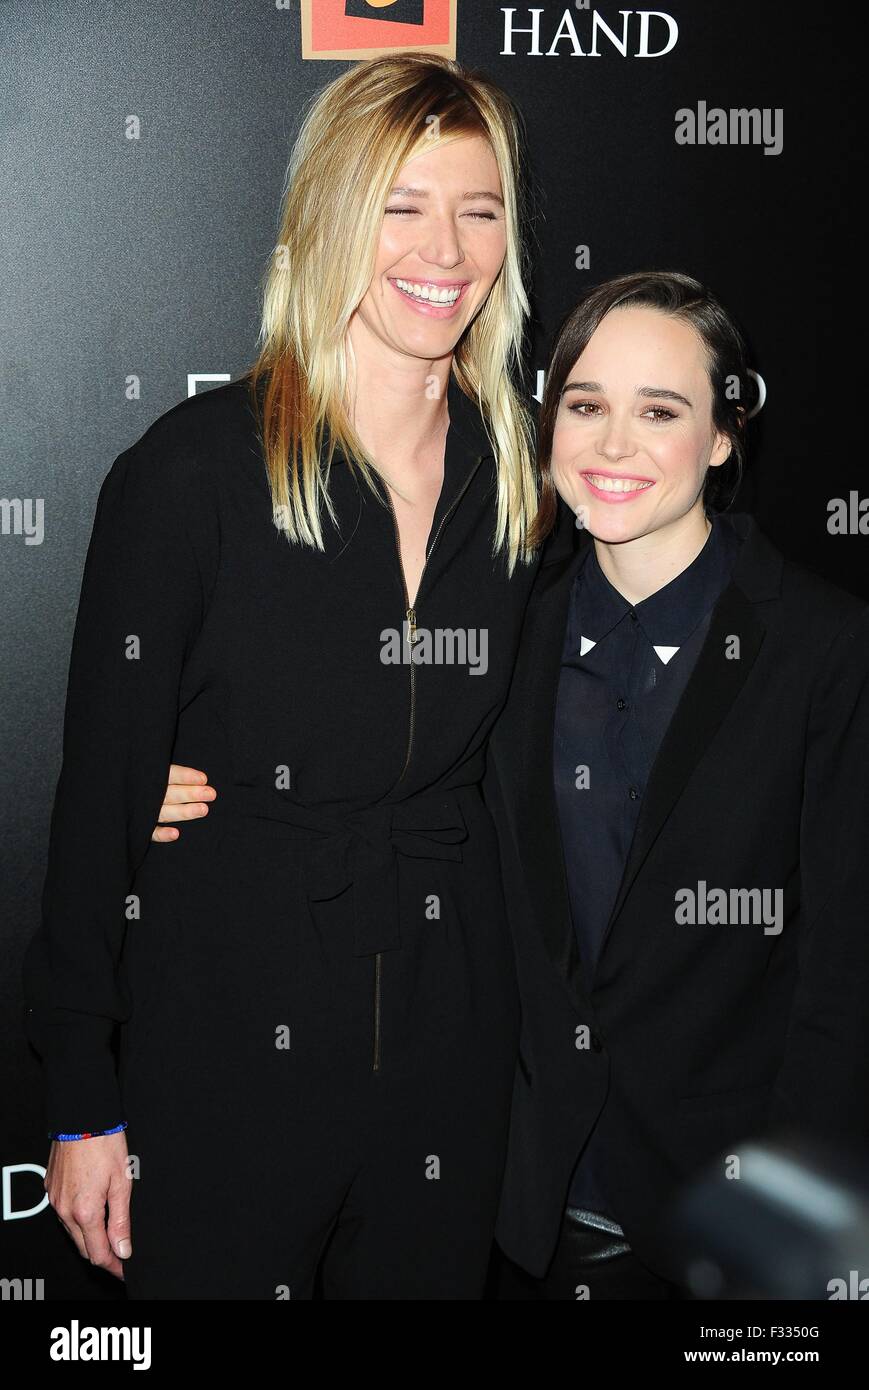 New York, NY, USA. 28th Sep, 2015. Samantha Thomas, Ellen Page at arrivals for FREEHELD Premiere, Museum of Modern Art (MoMA), New York, NY September 28, 2015. Credit:  Gregorio T. Binuya/Everett Collection/Alamy Live News Stock Photo